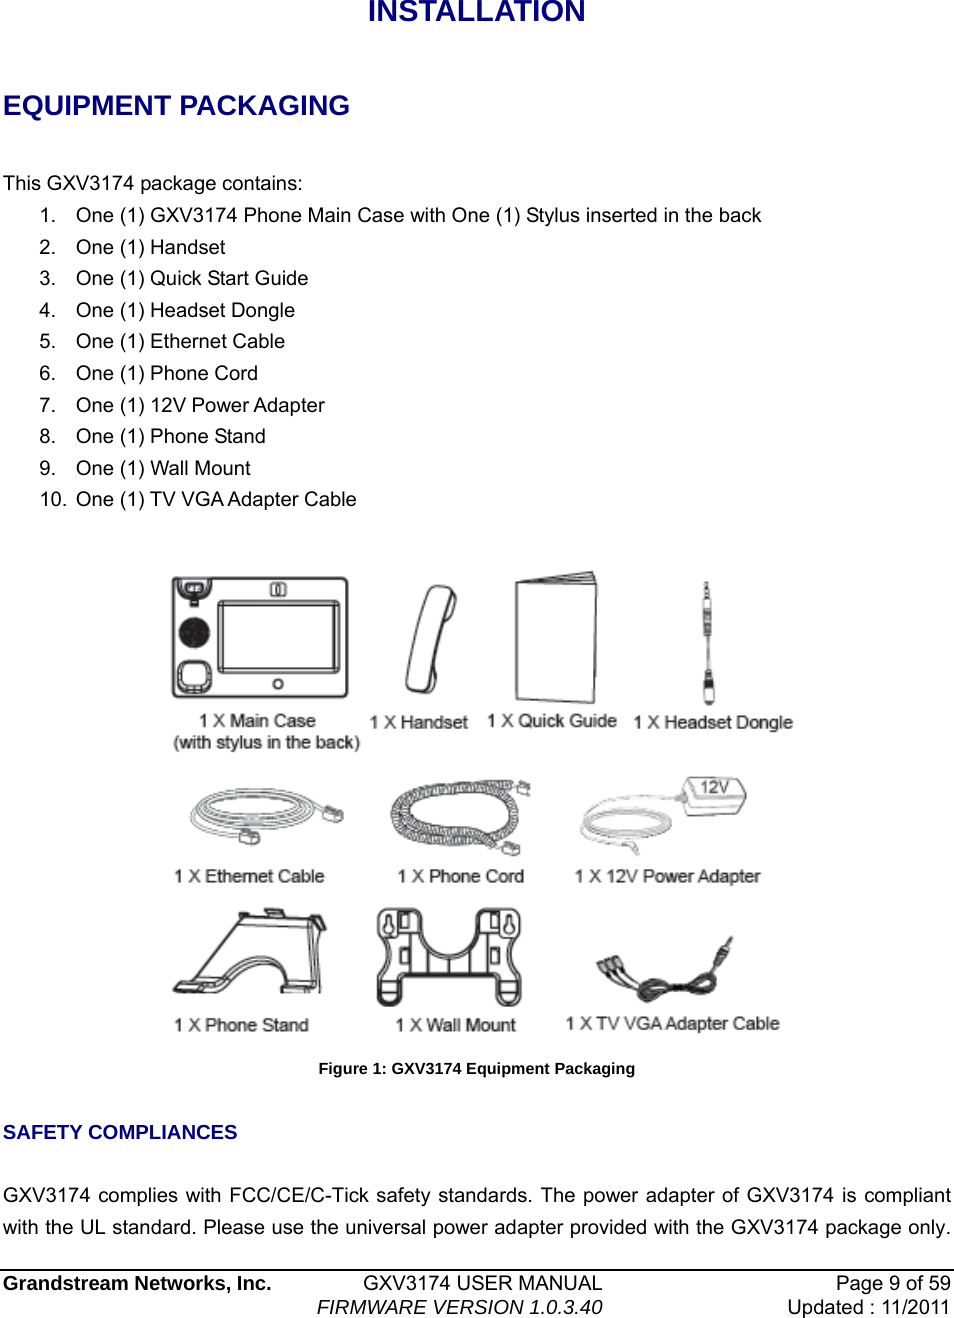  Grandstream Networks, Inc.         GXV3174 USER MANUAL  Page 9 of 59                                FIRMWARE VERSION 1.0.3.40 Updated : 11/2011    INSTALLATION  EQUIPMENT PACKAGING  This GXV3174 package contains: 1.  One (1) GXV3174 Phone Main Case with One (1) Stylus inserted in the back 2.  One (1) Handset 3.  One (1) Quick Start Guide 4.  One (1) Headset Dongle 5.  One (1) Ethernet Cable 6.  One (1) Phone Cord   7.  One (1) 12V Power Adapter 8.  One (1) Phone Stand 9.  One (1) Wall Mount 10.  One (1) TV VGA Adapter Cable   Figure 1: GXV3174 Equipment Packaging  SAFETY COMPLIANCES  GXV3174 complies with FCC/CE/C-Tick safety standards. The power adapter of GXV3174 is compliant with the UL standard. Please use the universal power adapter provided with the GXV3174 package only.   